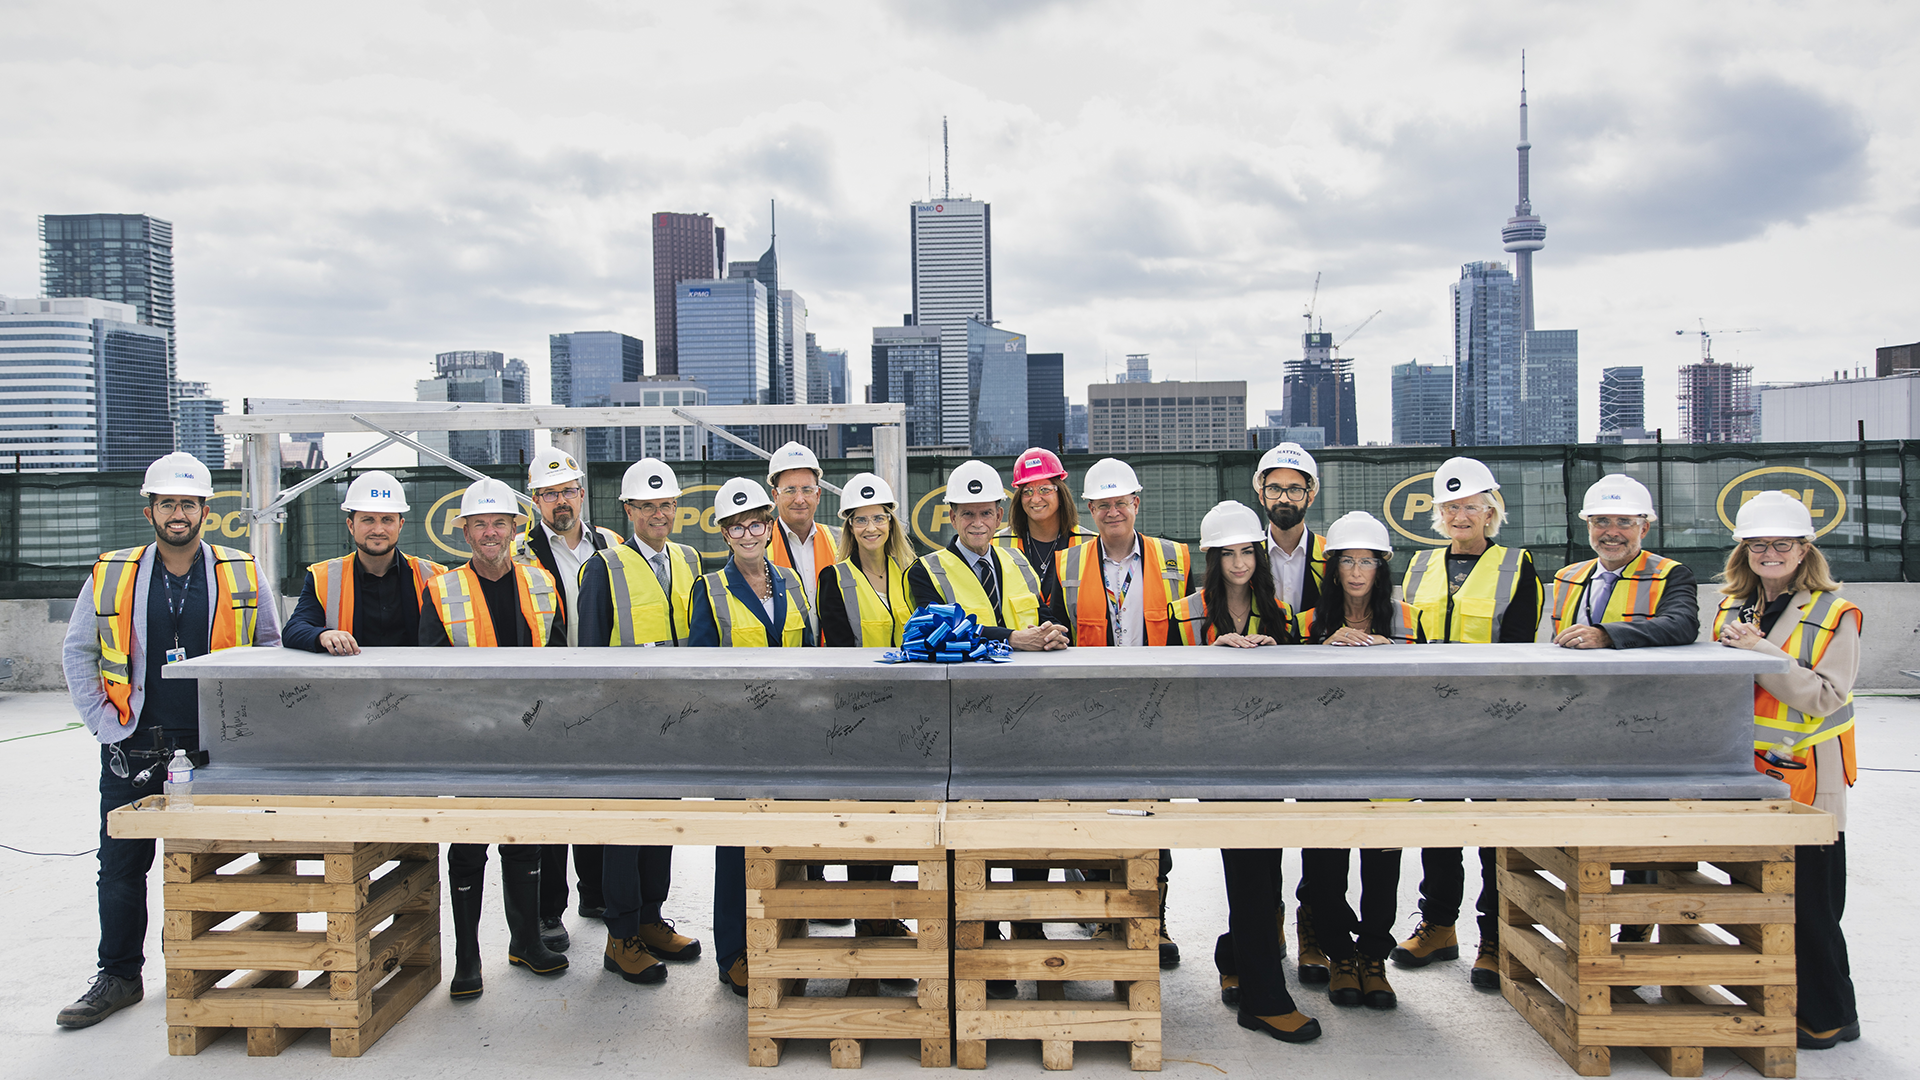 A large group of men and women wearing construction gear stand together with a large steel beam covered in signatures. The Toronto skyline is visible behind them